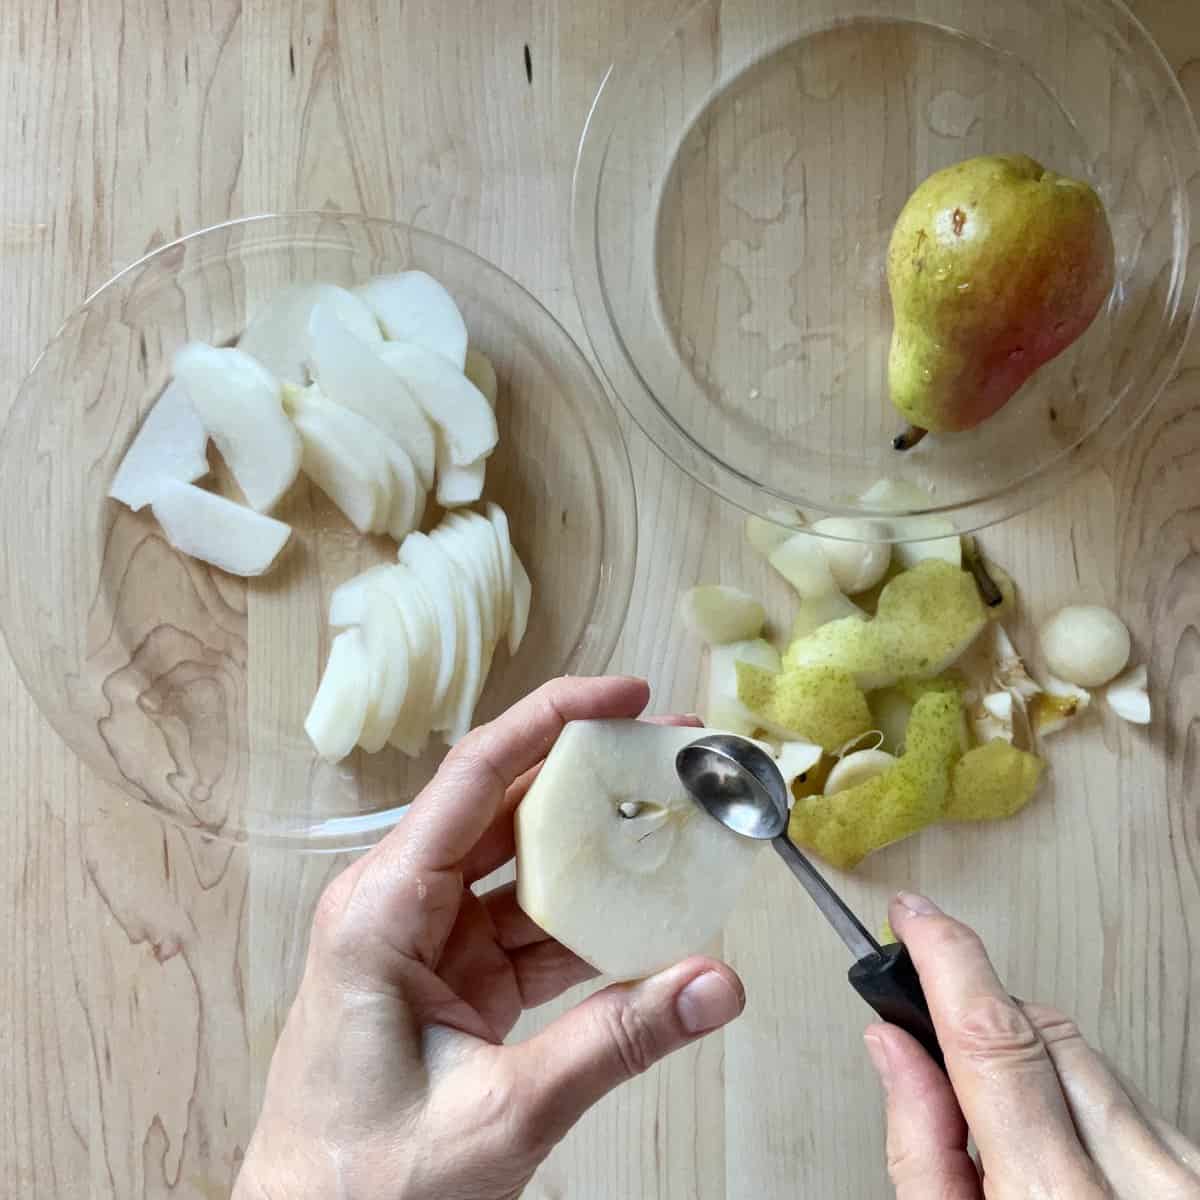 Removing the core of a pear with a melon baller..